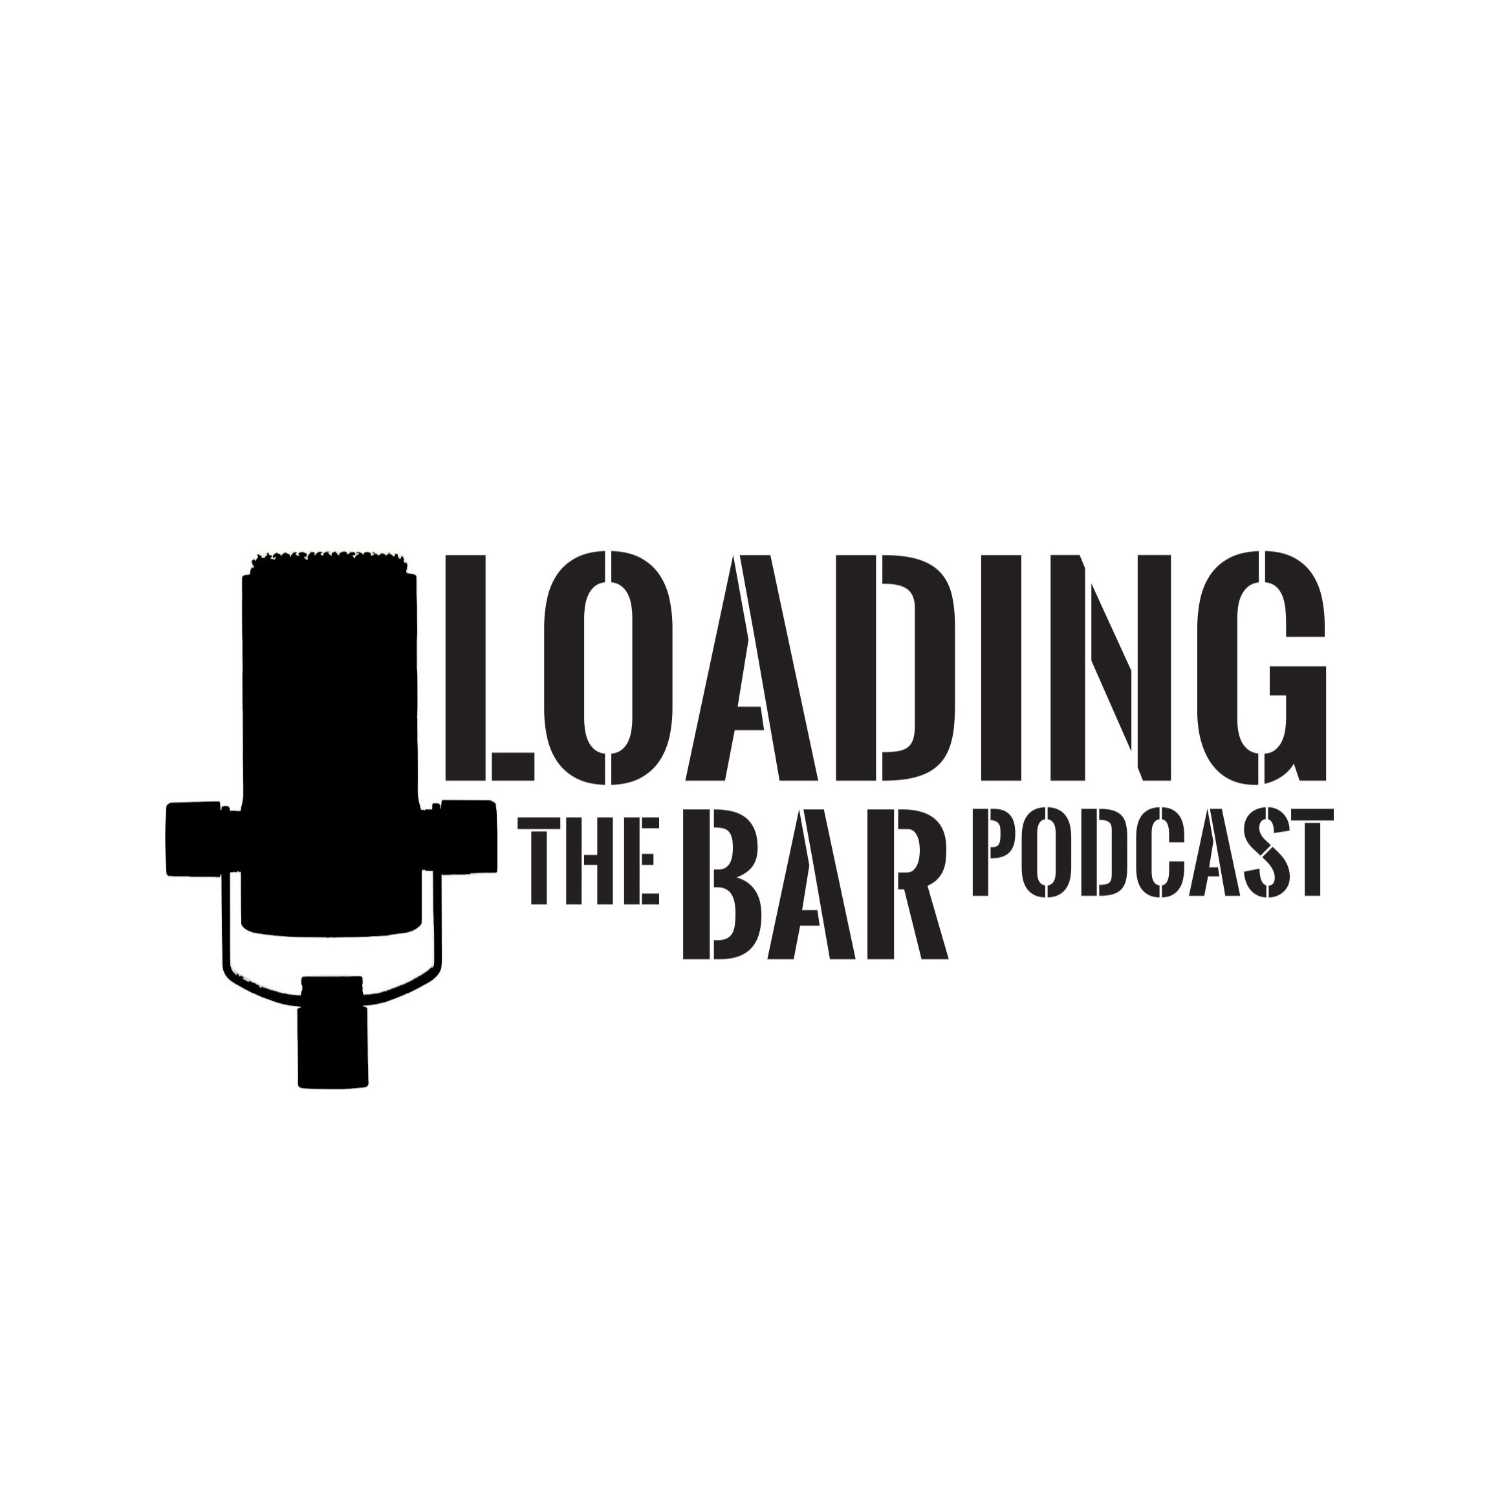 Loading The Bar Podcast